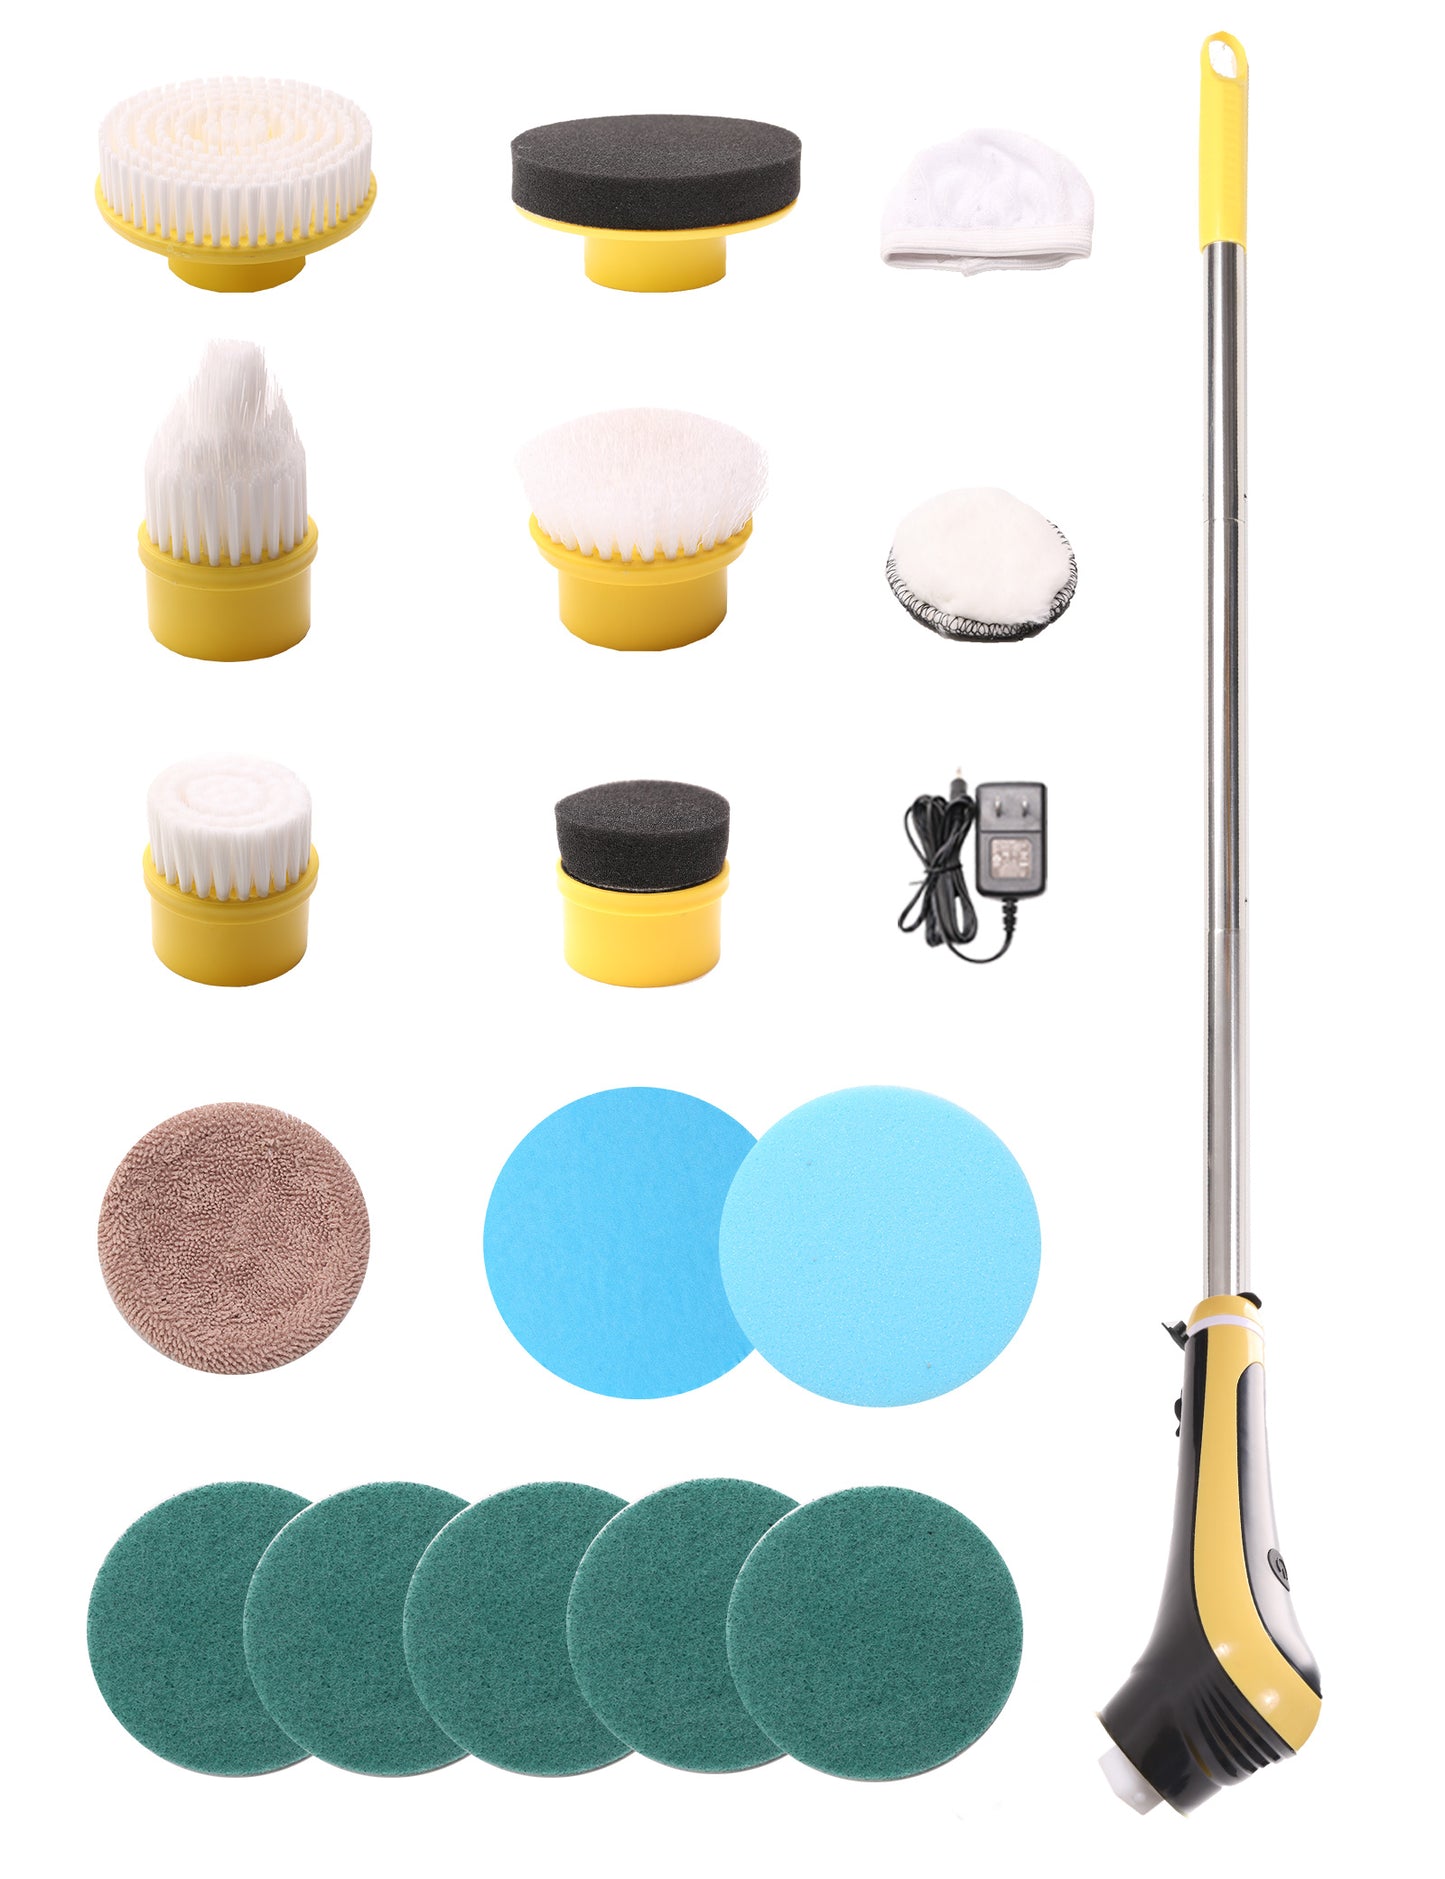 Two Battery Electric Tile Floor Scrubber with 16 Brushes Heads, Two Battery  Electric Spin Scrubber with 2 Sets of Cleaning Brush Head